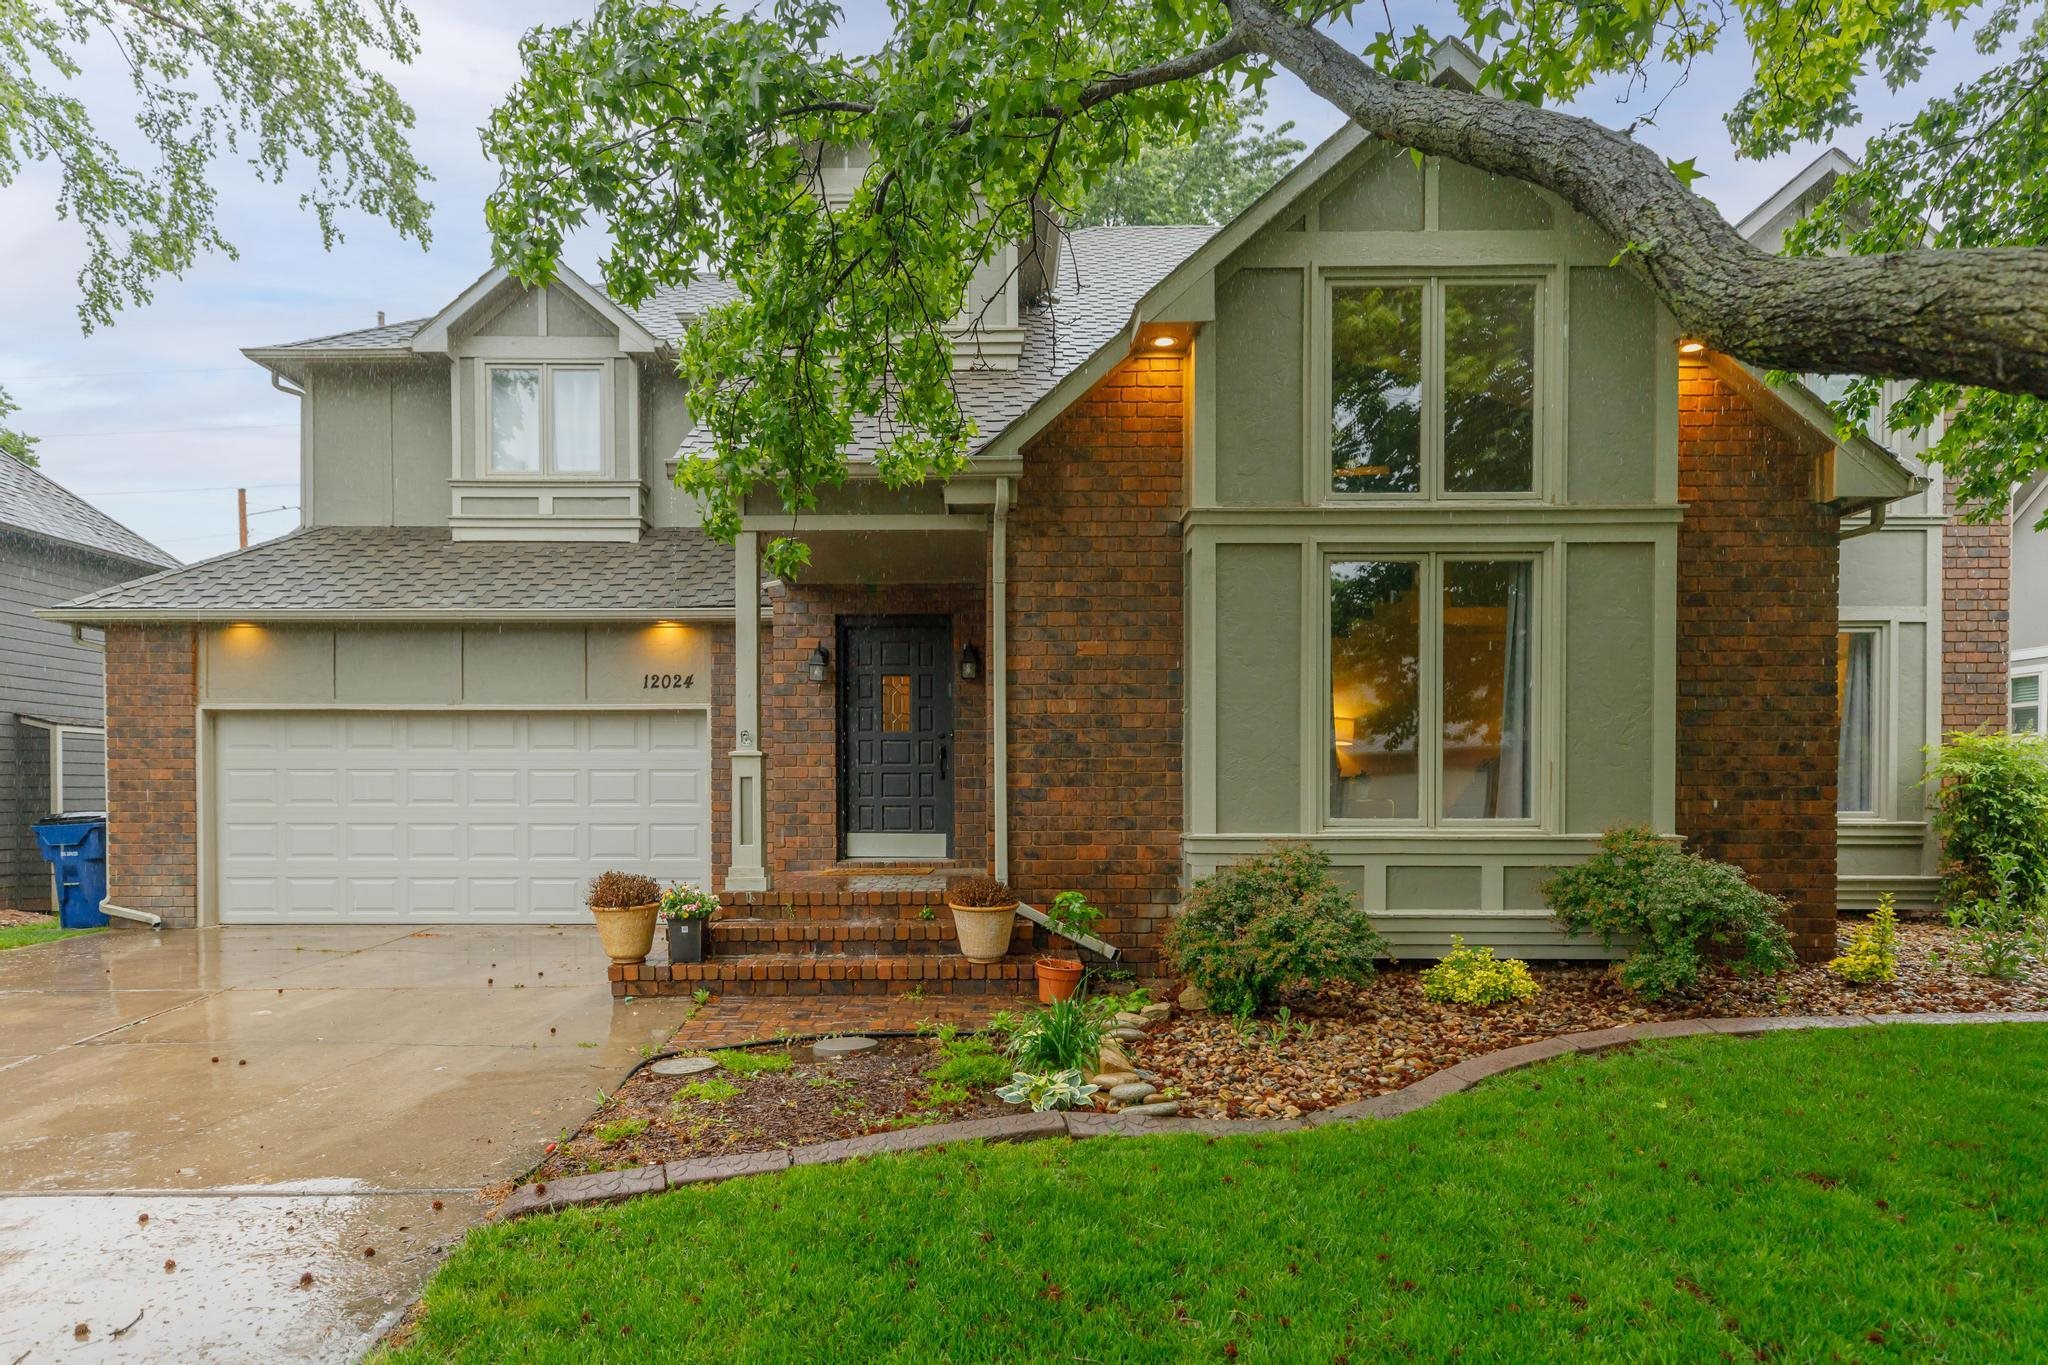 Gorgeous two story remodeled home in the desirable Deer Trail neighborhood! Featuring 4 bedrooms, 3 